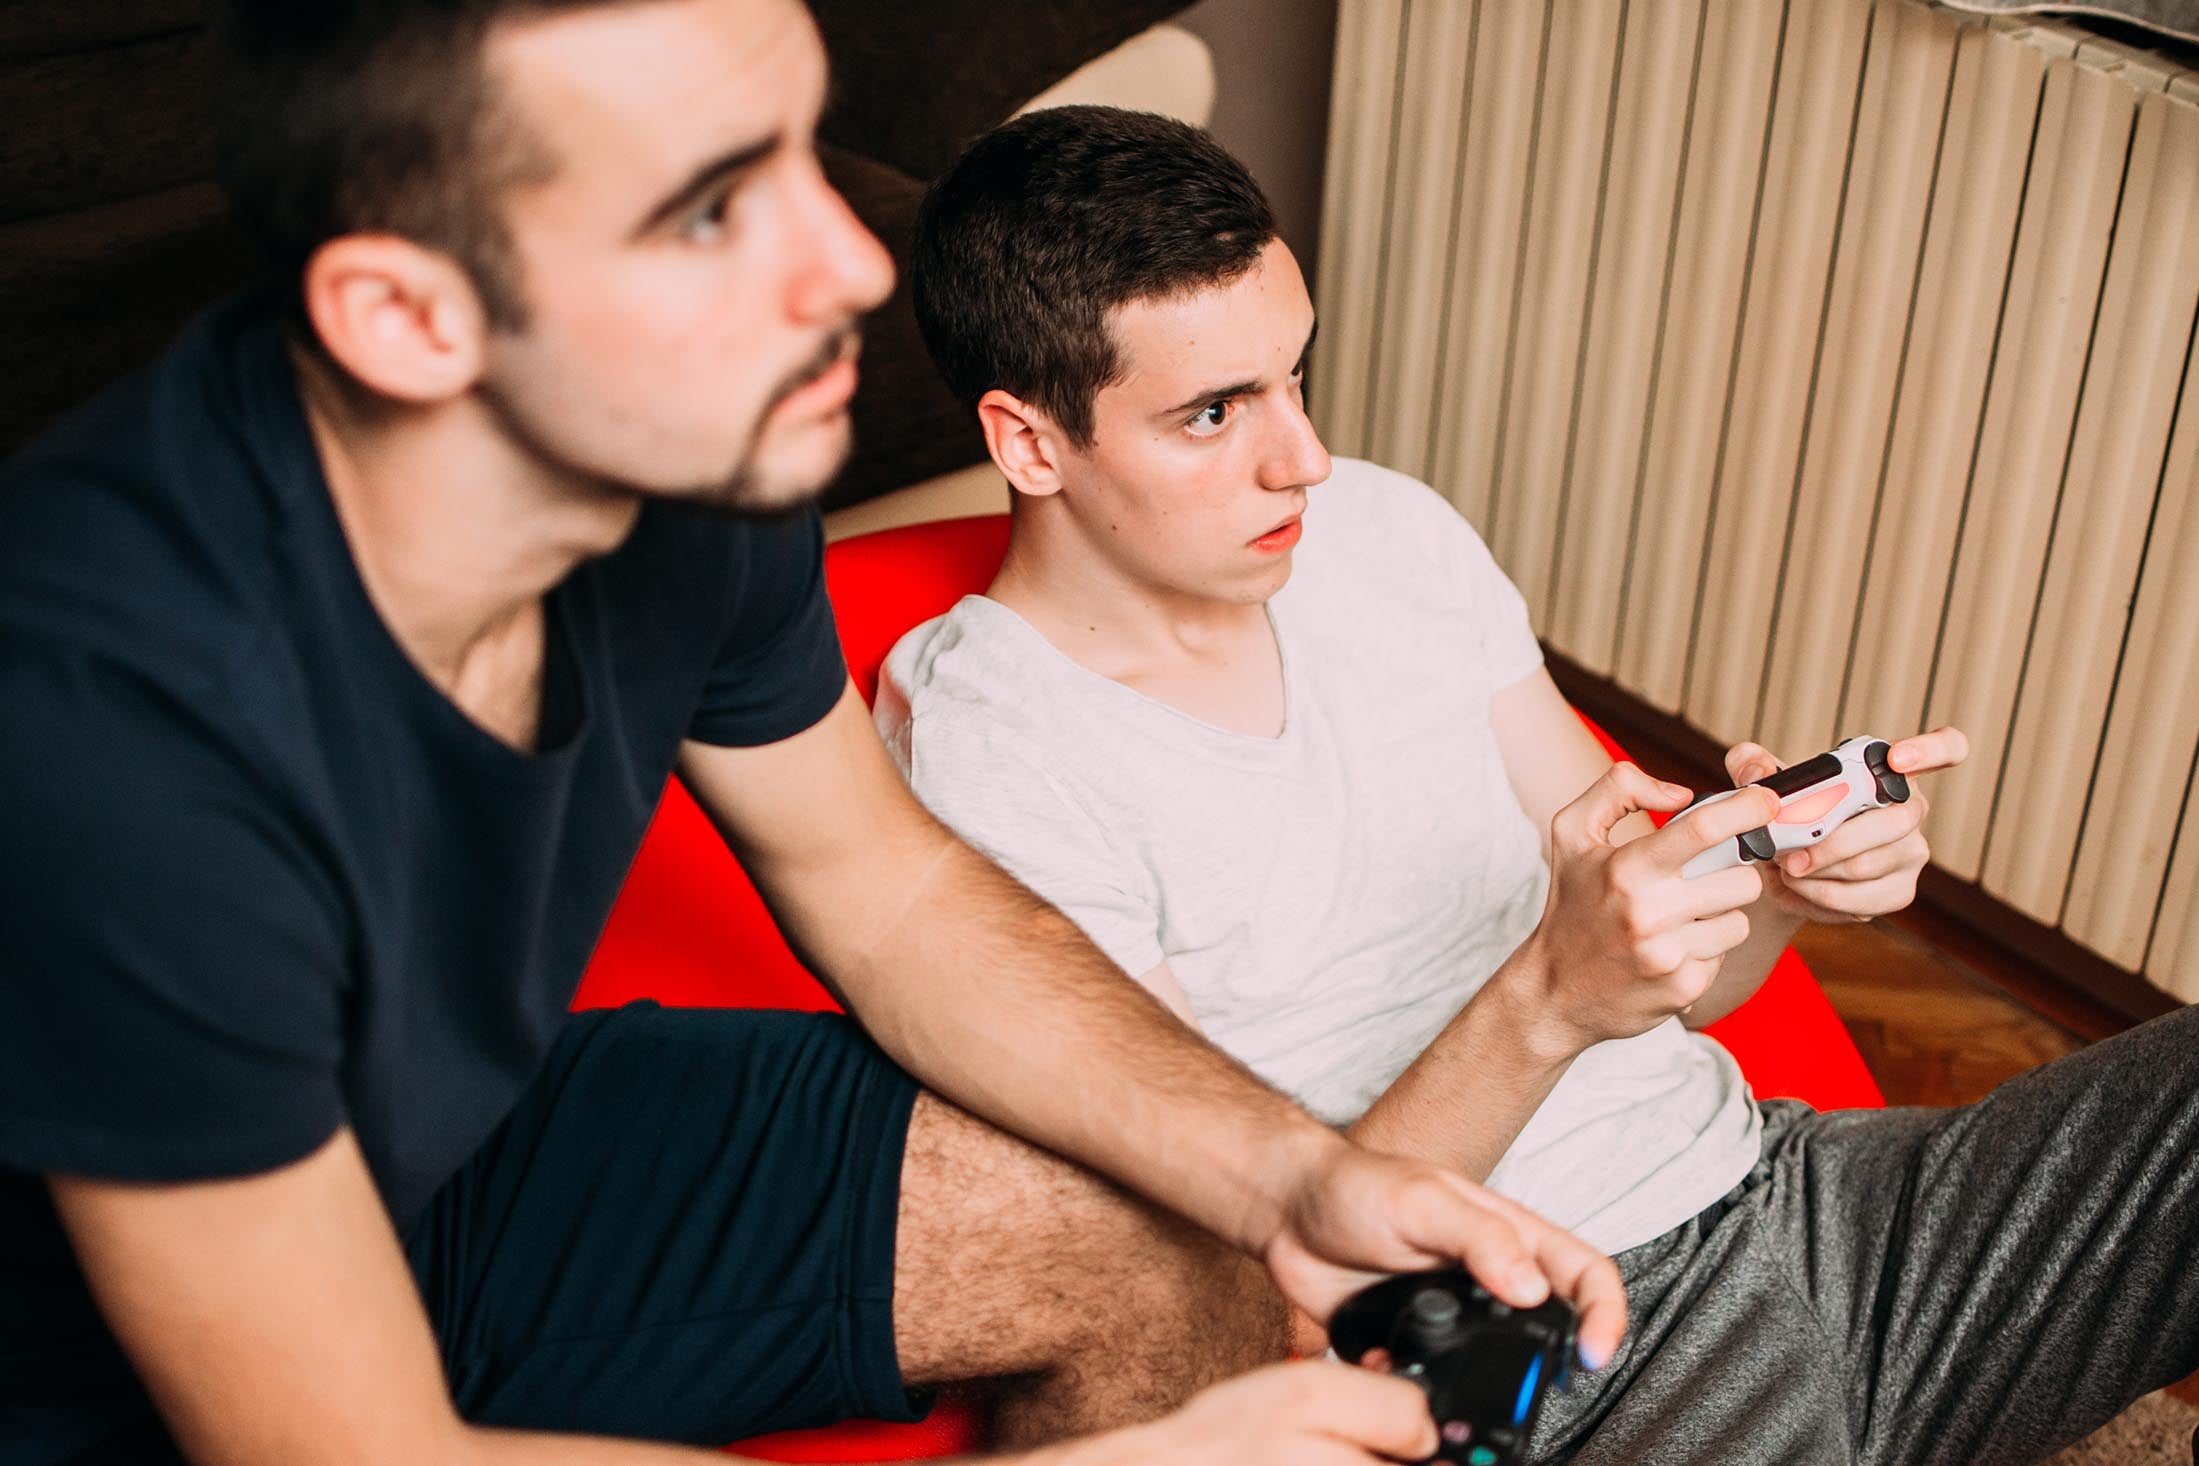 Two young men playing video games.